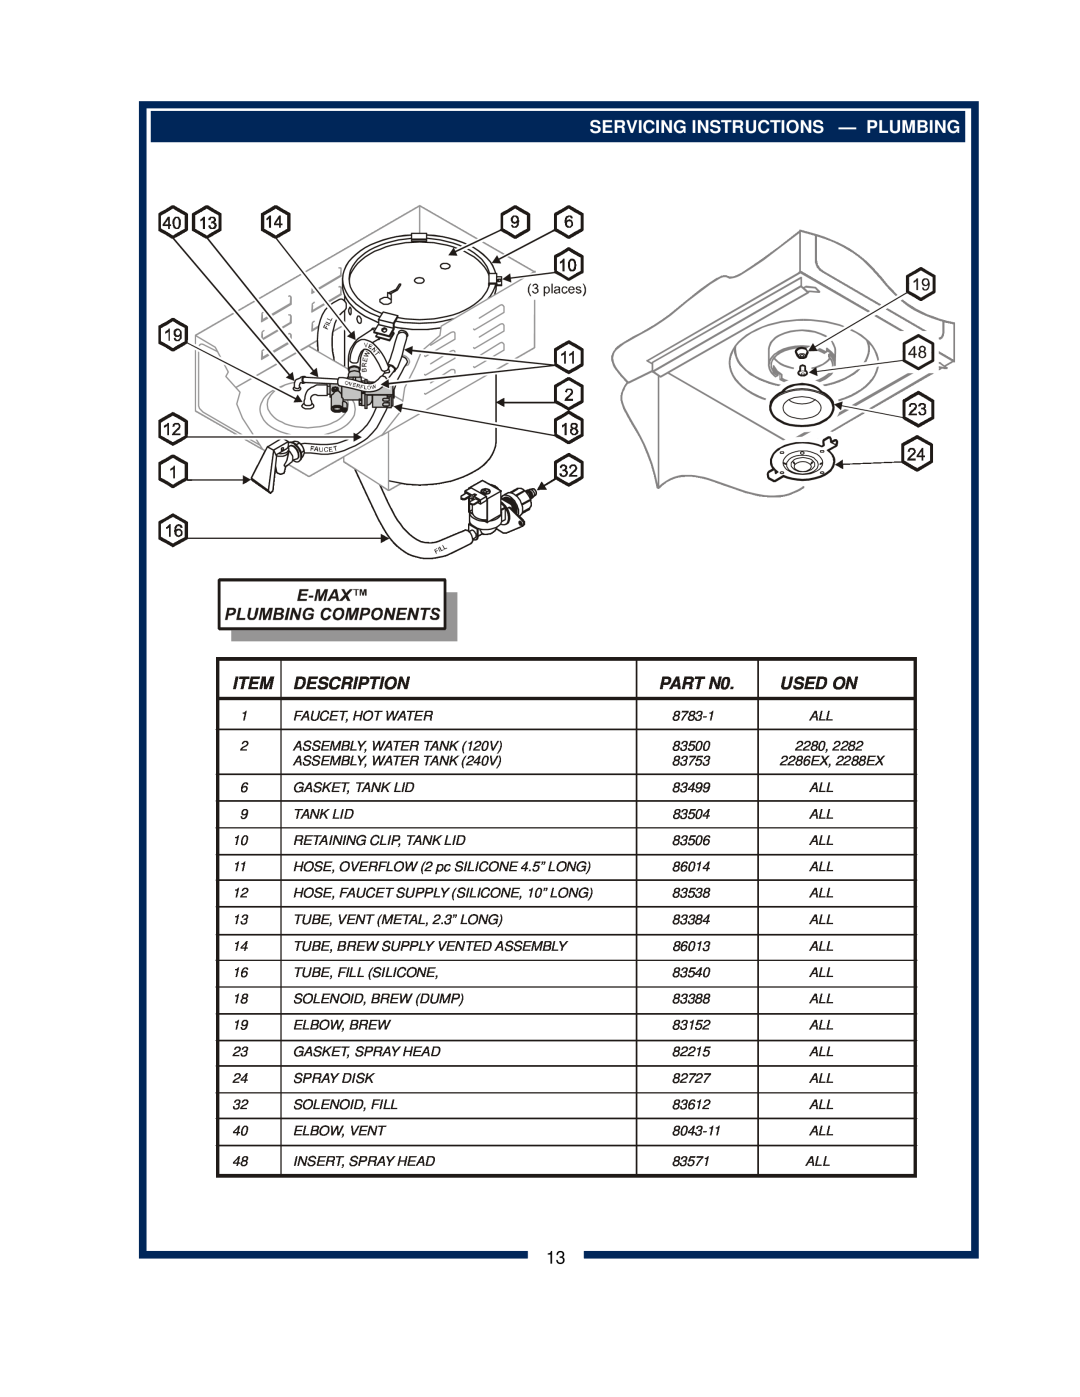 Bloomfield 2286EX, 2288EX, 2280, 2282 owner manual Servicing Instructions - Plumbing, Description, PART N0, Used On 